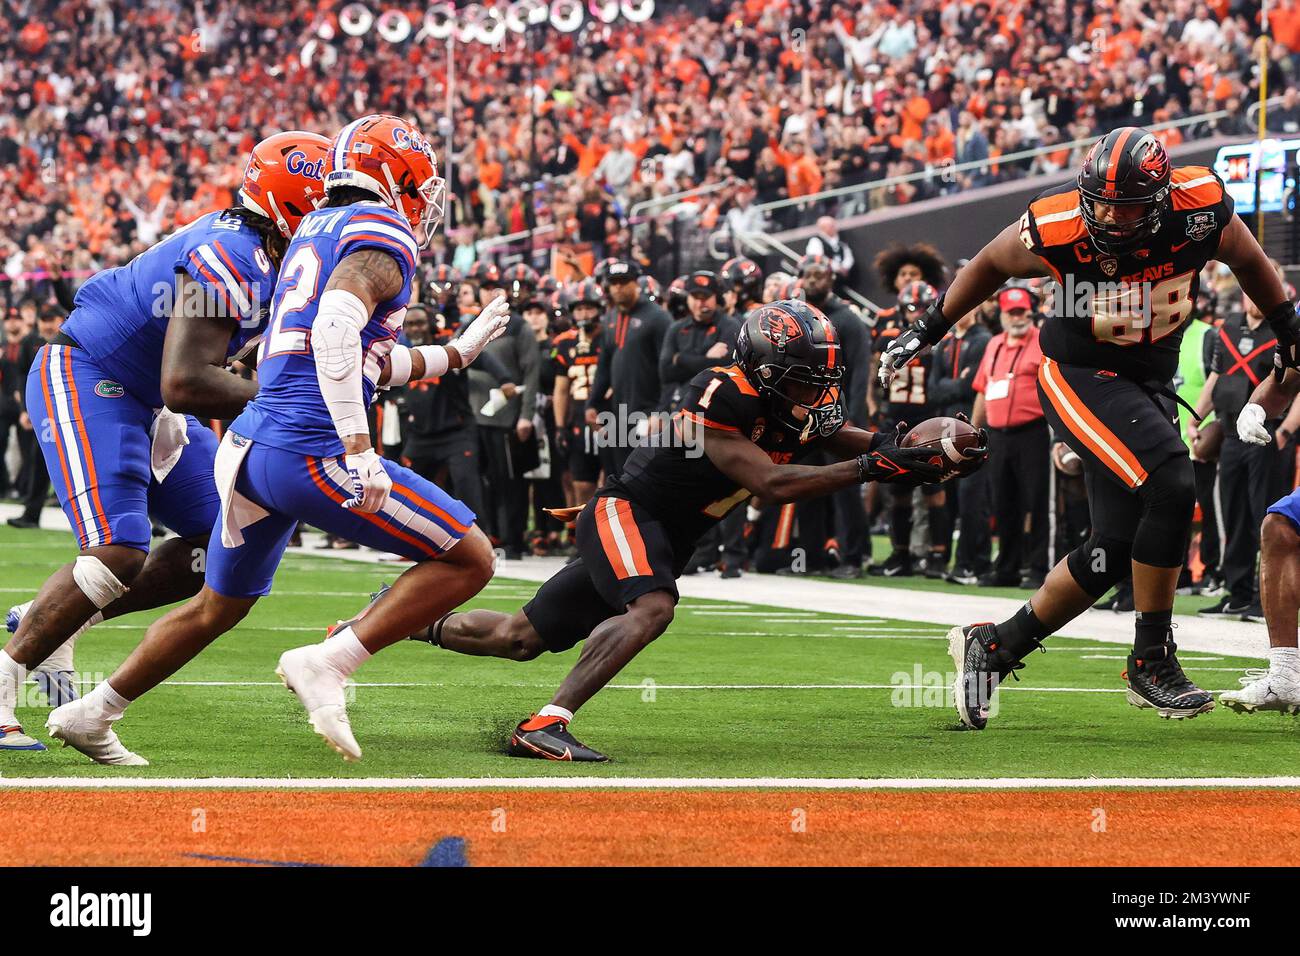 Las Vegas, NV, USA. 17th Dec, 2022. Oregon State Beavers wide receiver Tyjon Lindsey (1) scores a touchdown during the first half of the SRS Distribution Las Vegas Bowl featuring the Florida Gators and the Oregon State Beavers at Allegiant Stadium in Las Vegas, NV. Christopher Trim/CSM/Alamy Live News Stock Photo